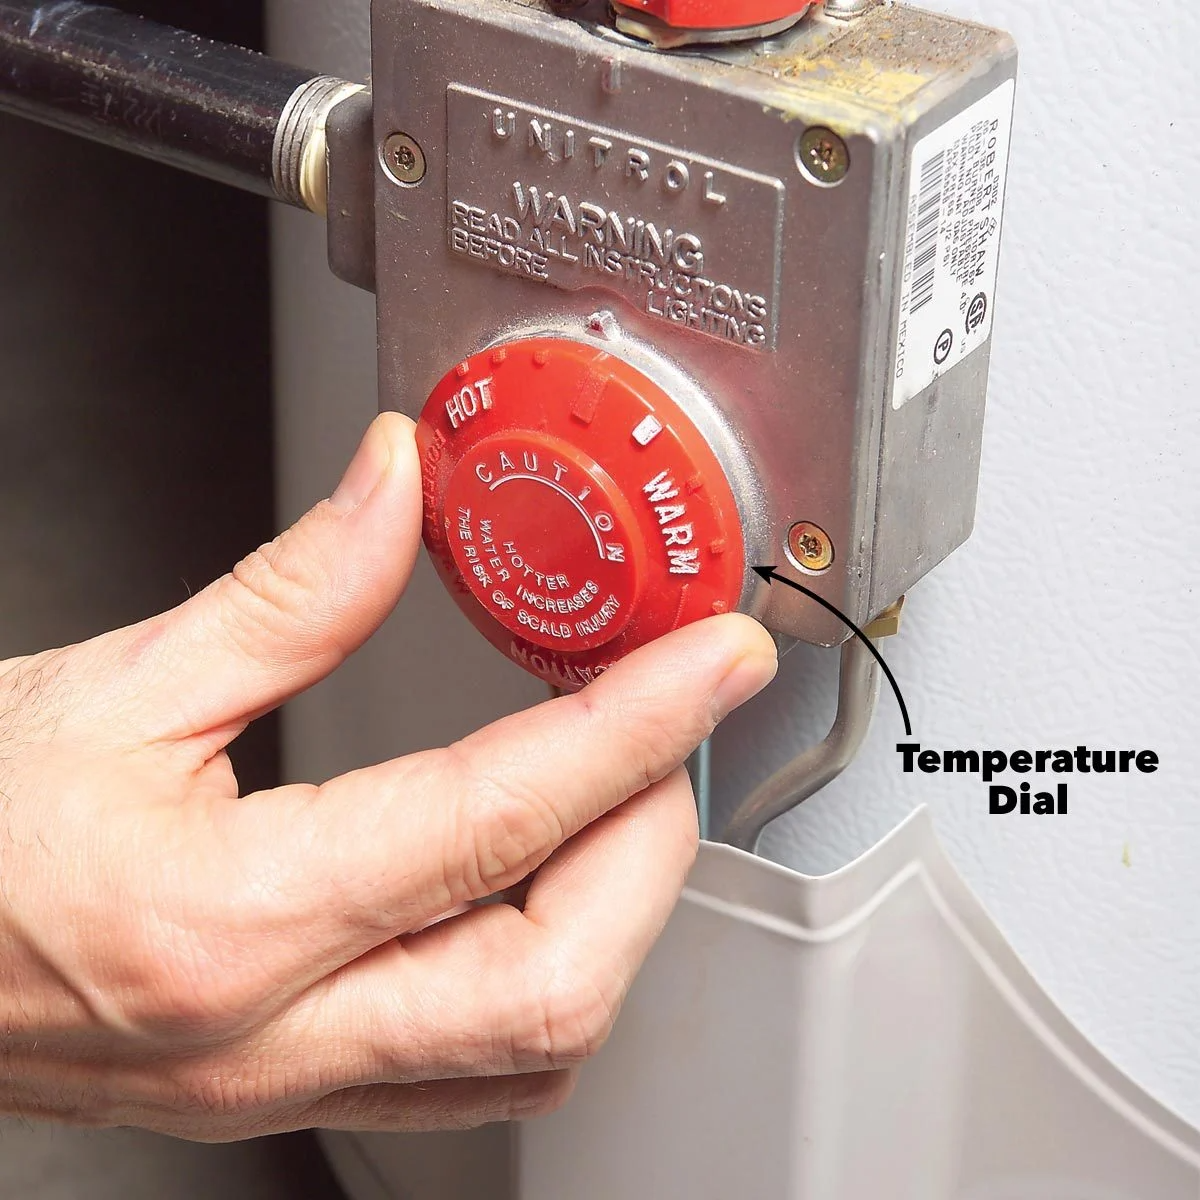 Benefits to Lowering Your Water Heater Temperature